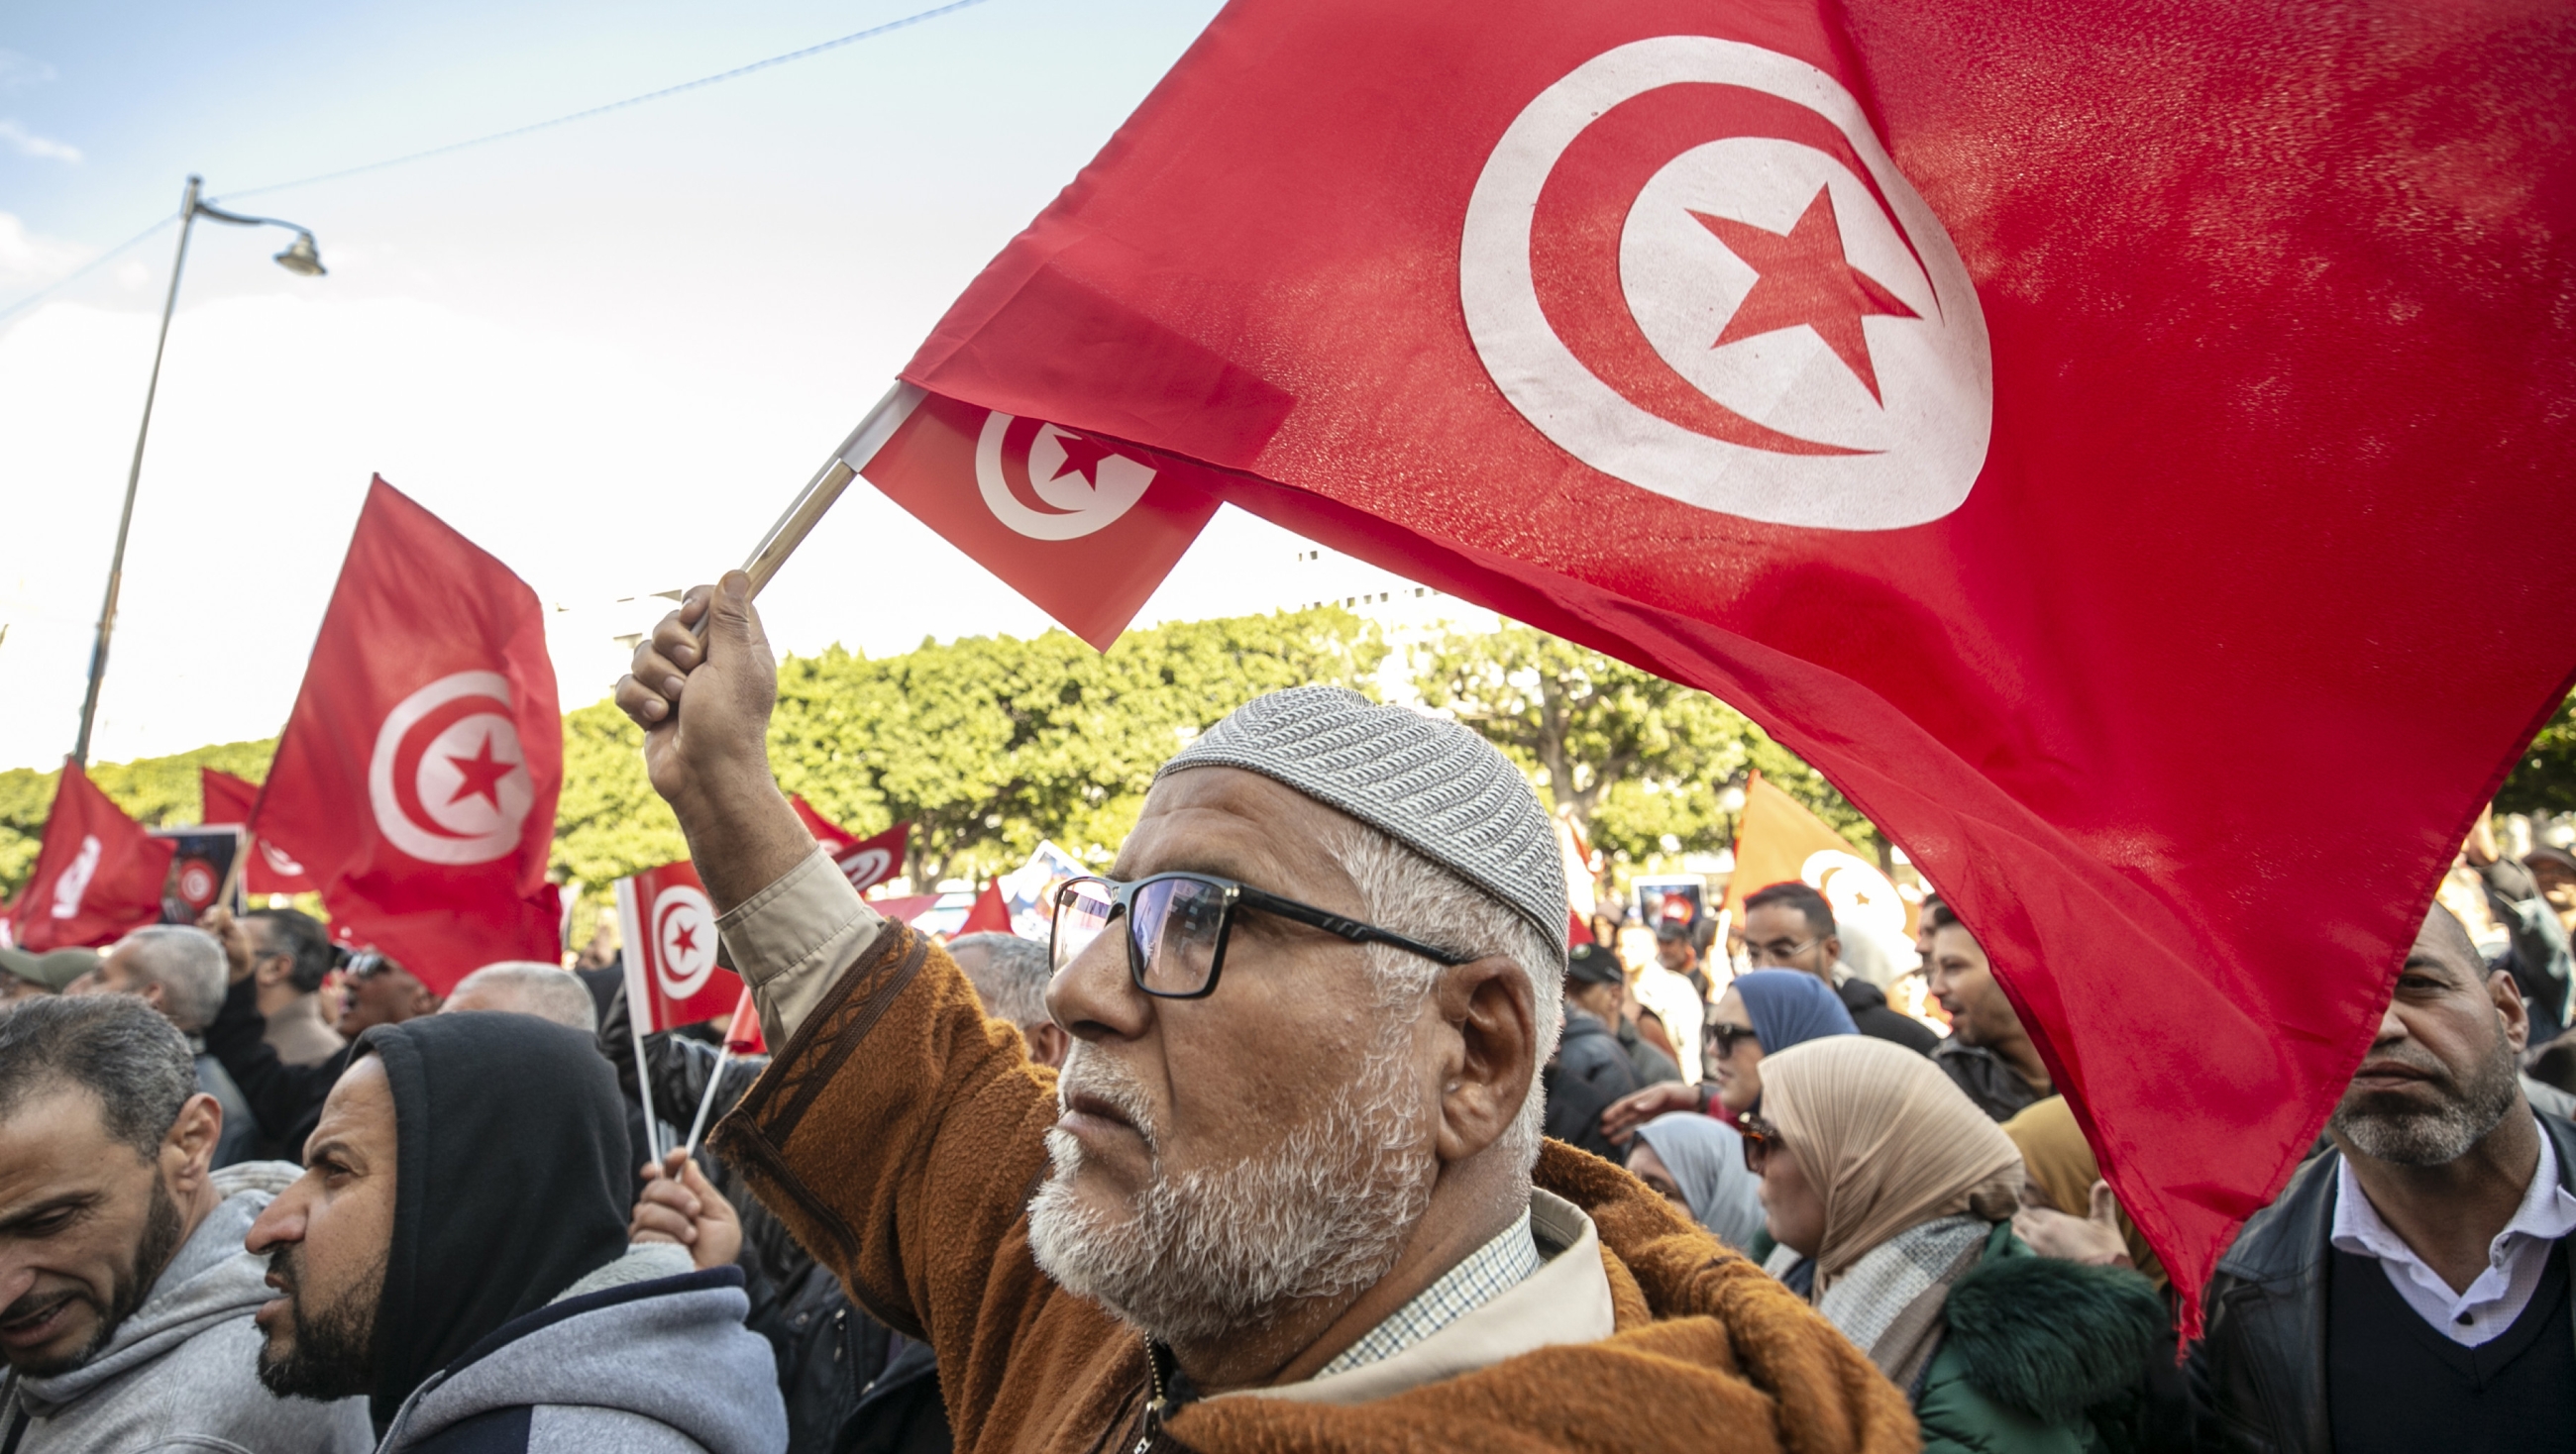 Tunisians demonstrate against the government of President Kais Saied in the capital Tunis on 5 March 2023 (Anadolu Agency)